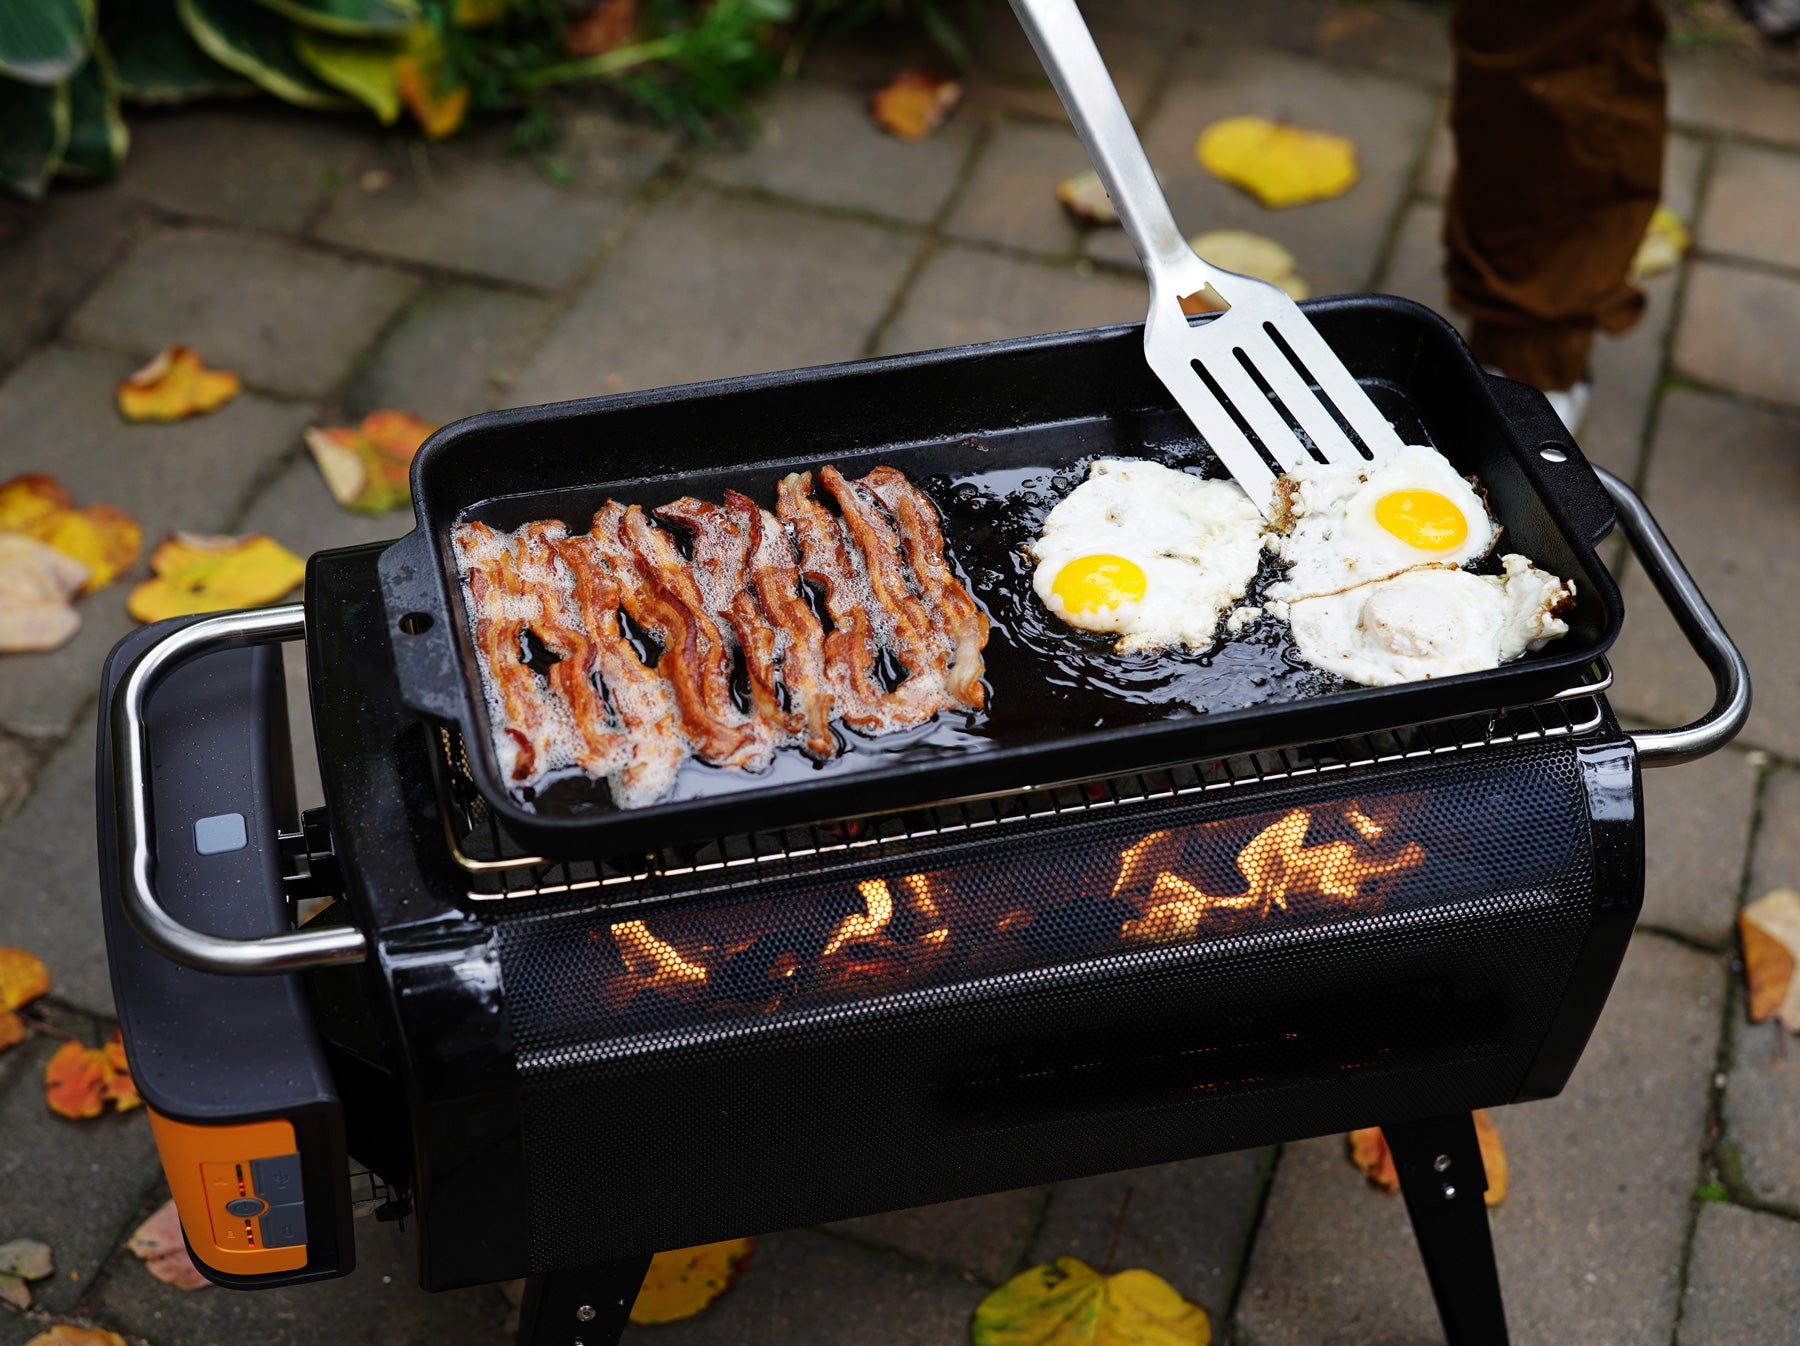 Biolite FirePit+ with the included grill grate and a pan cooking eggs and bacon